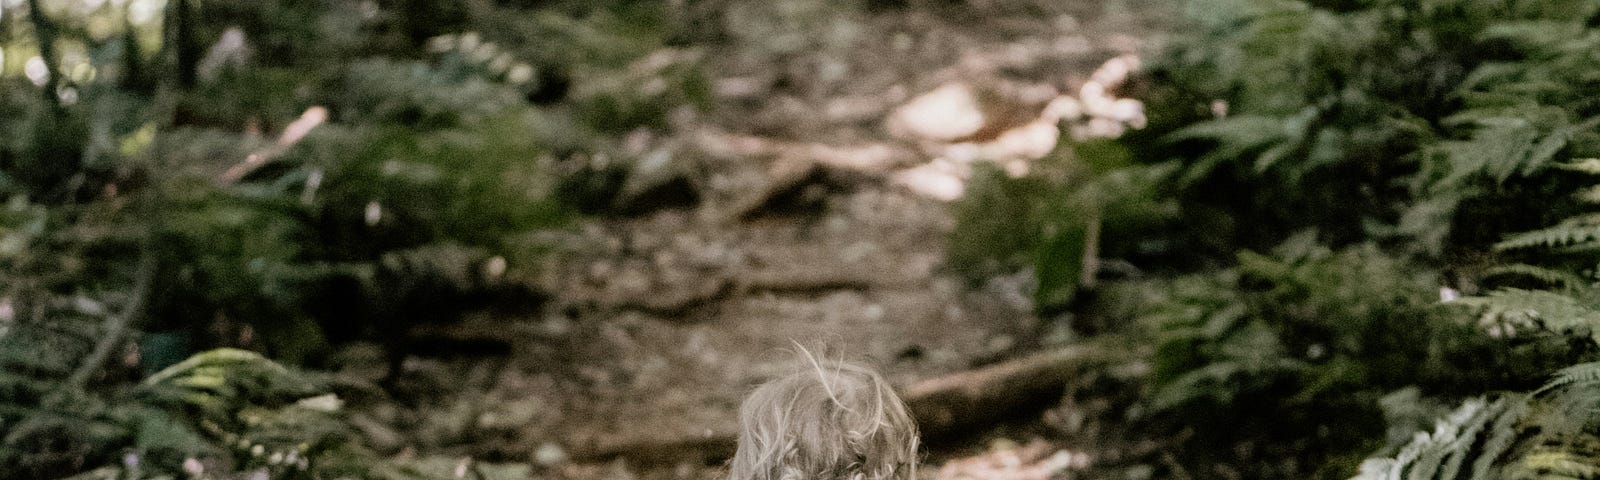 A toddler walks away from the camera along a woodland path.